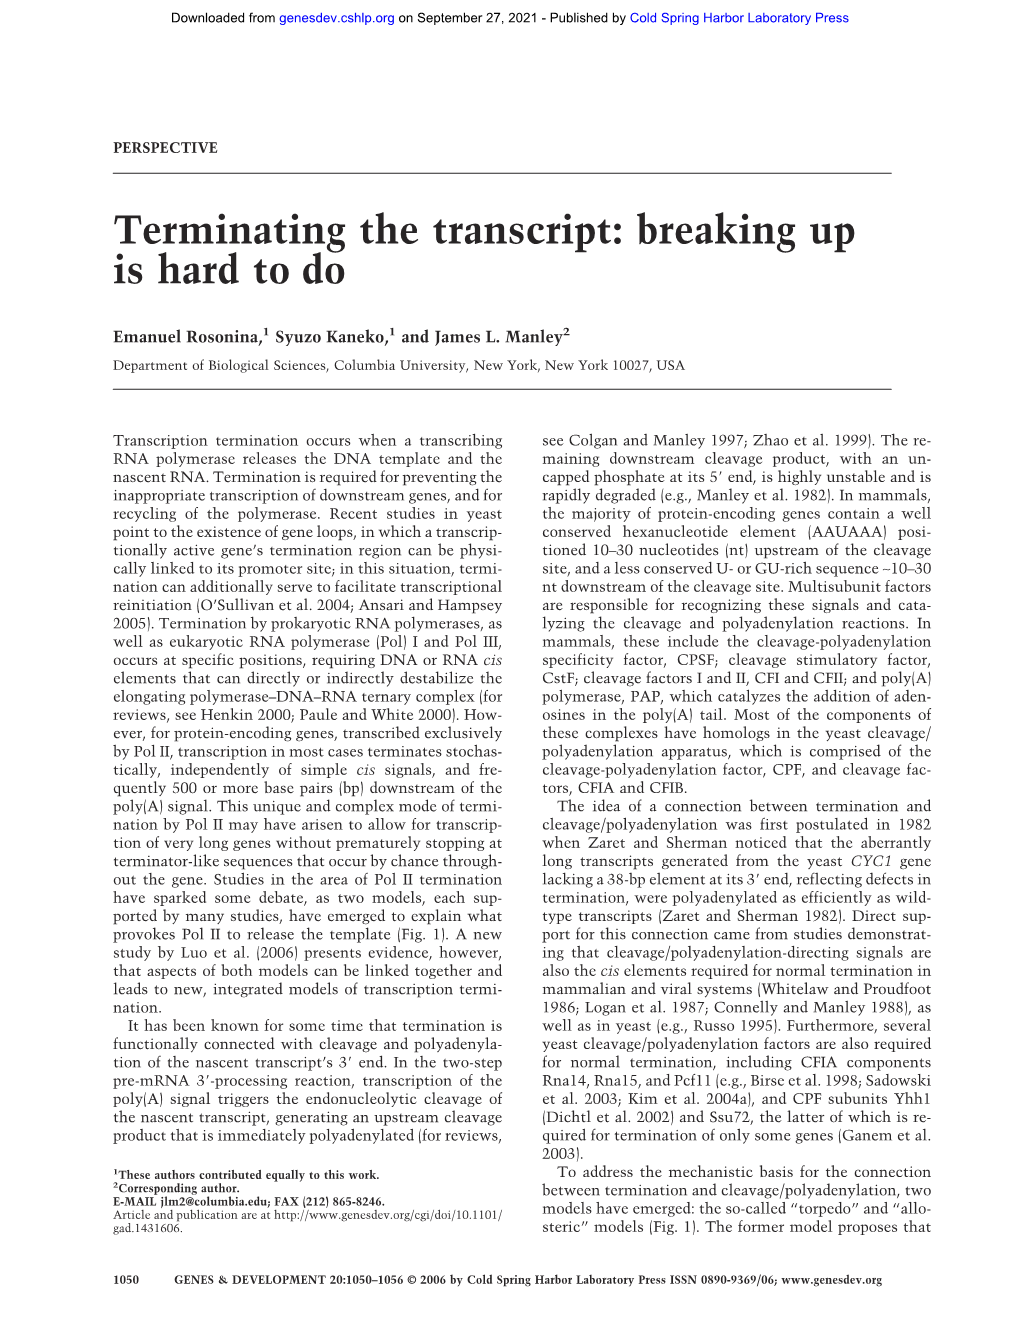 Terminating the Transcript: Breaking up Is Hard to Do